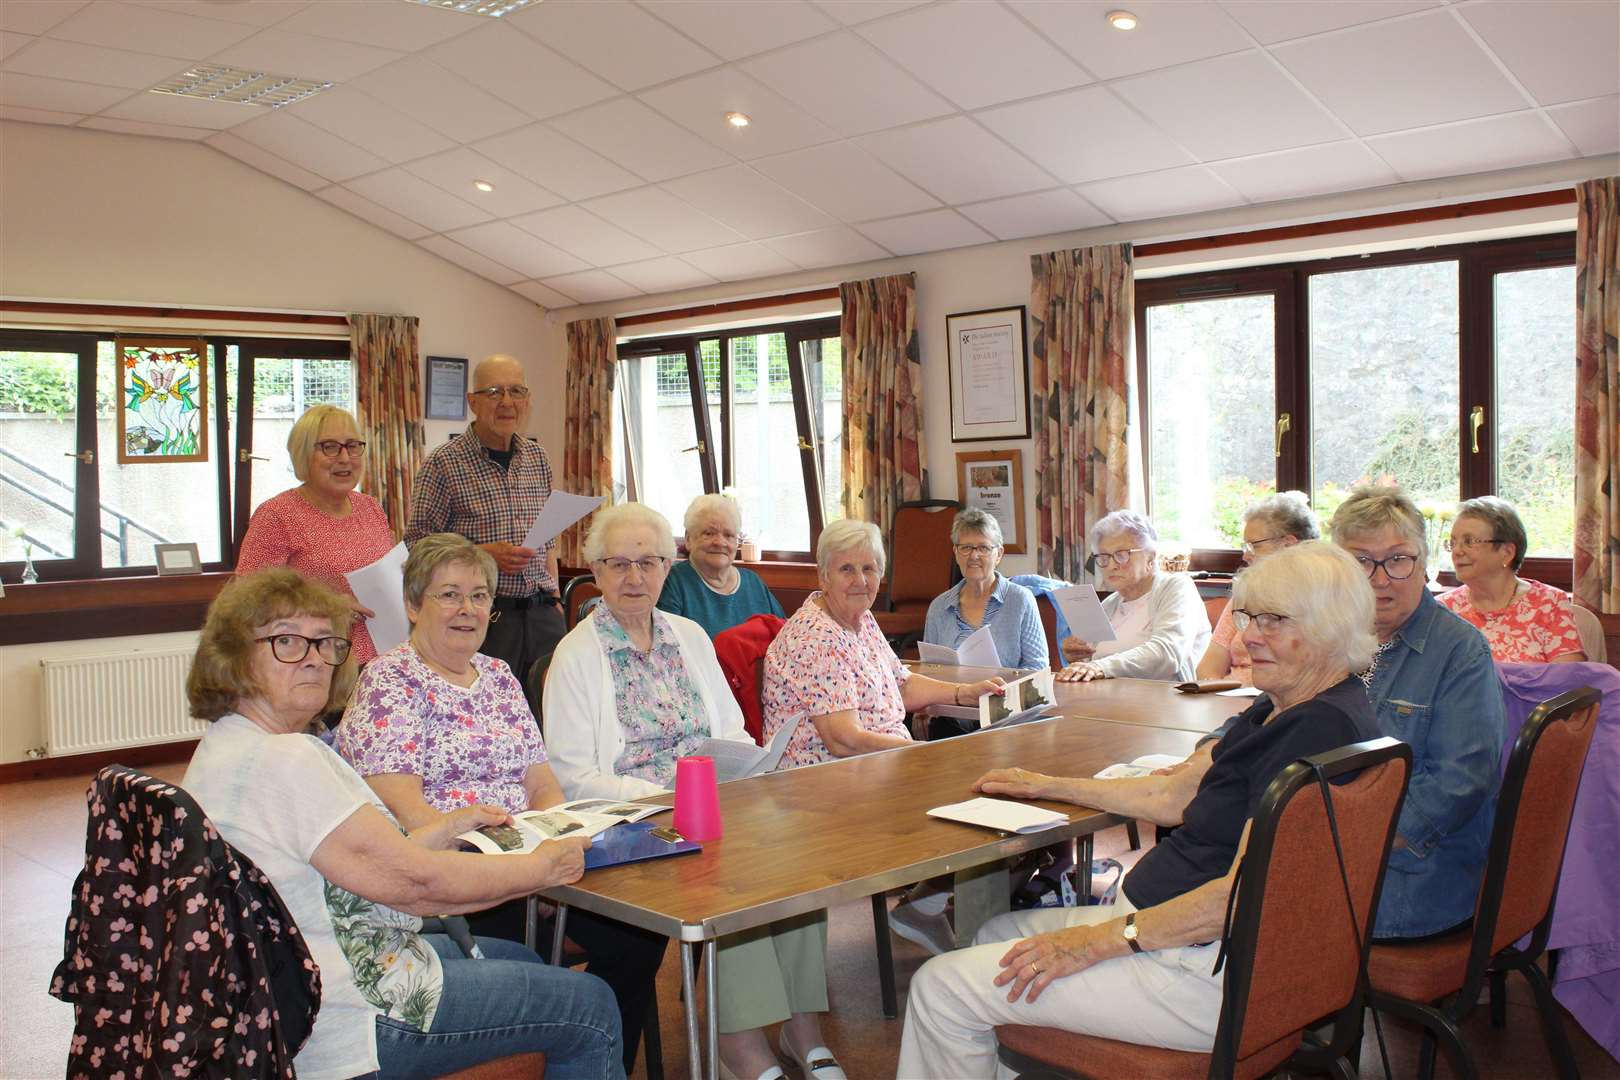 Some members of the Tuesday centre who welcomed the Reminiscence group at this week's meeting in the Friendship room, Kemnay village hall. Picture: Griselda McGregor